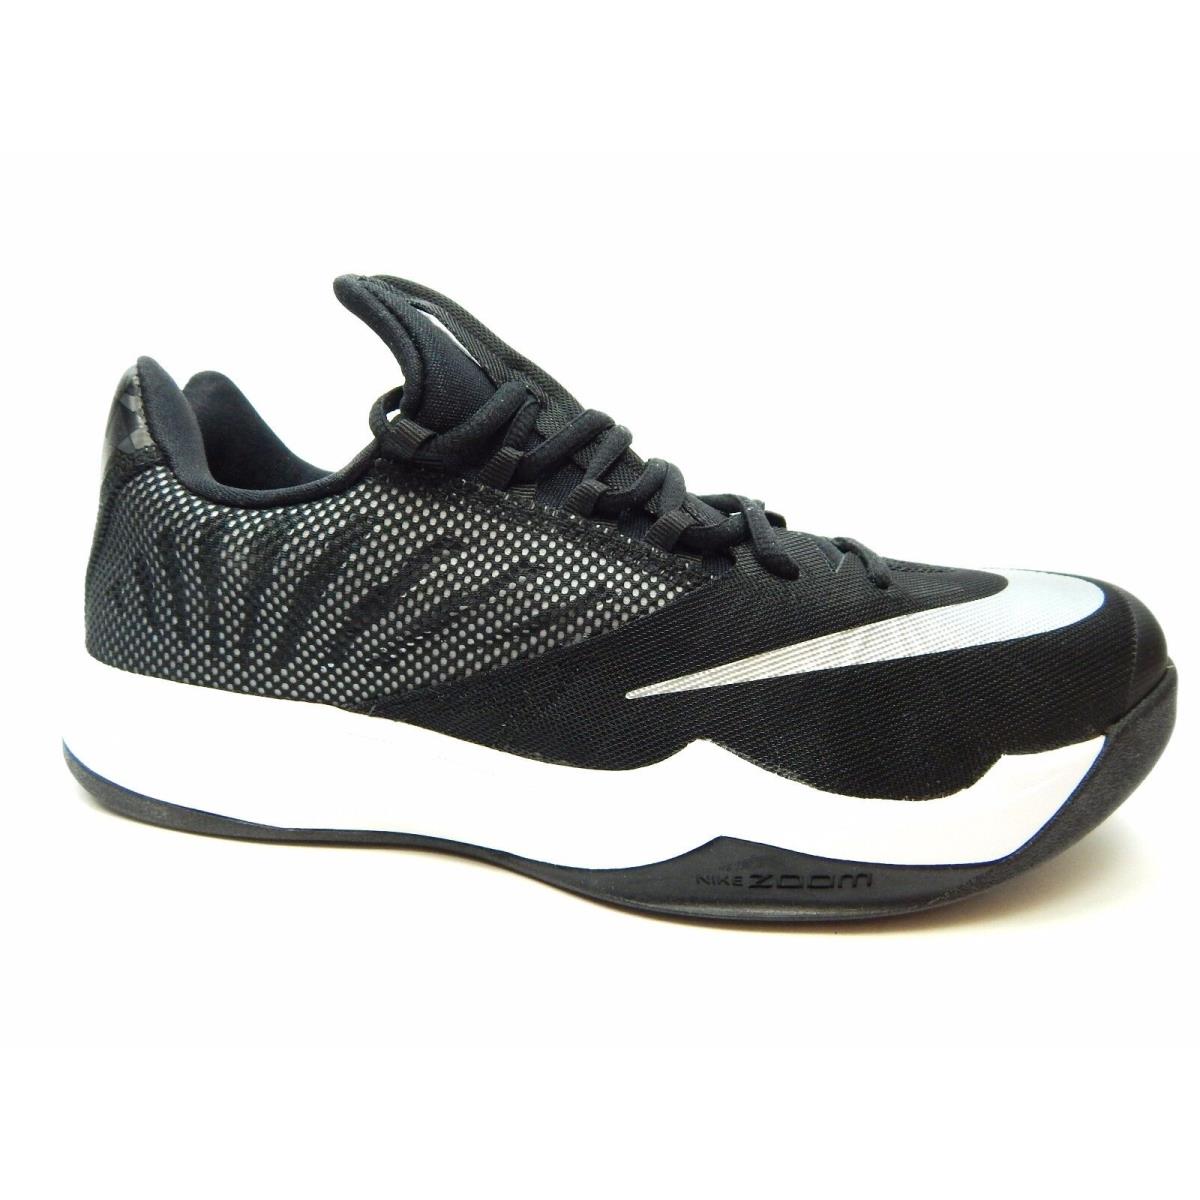 Nike Men`s Zoom Run The One TB 653467 001 Black Silver Shoes Size 6.5